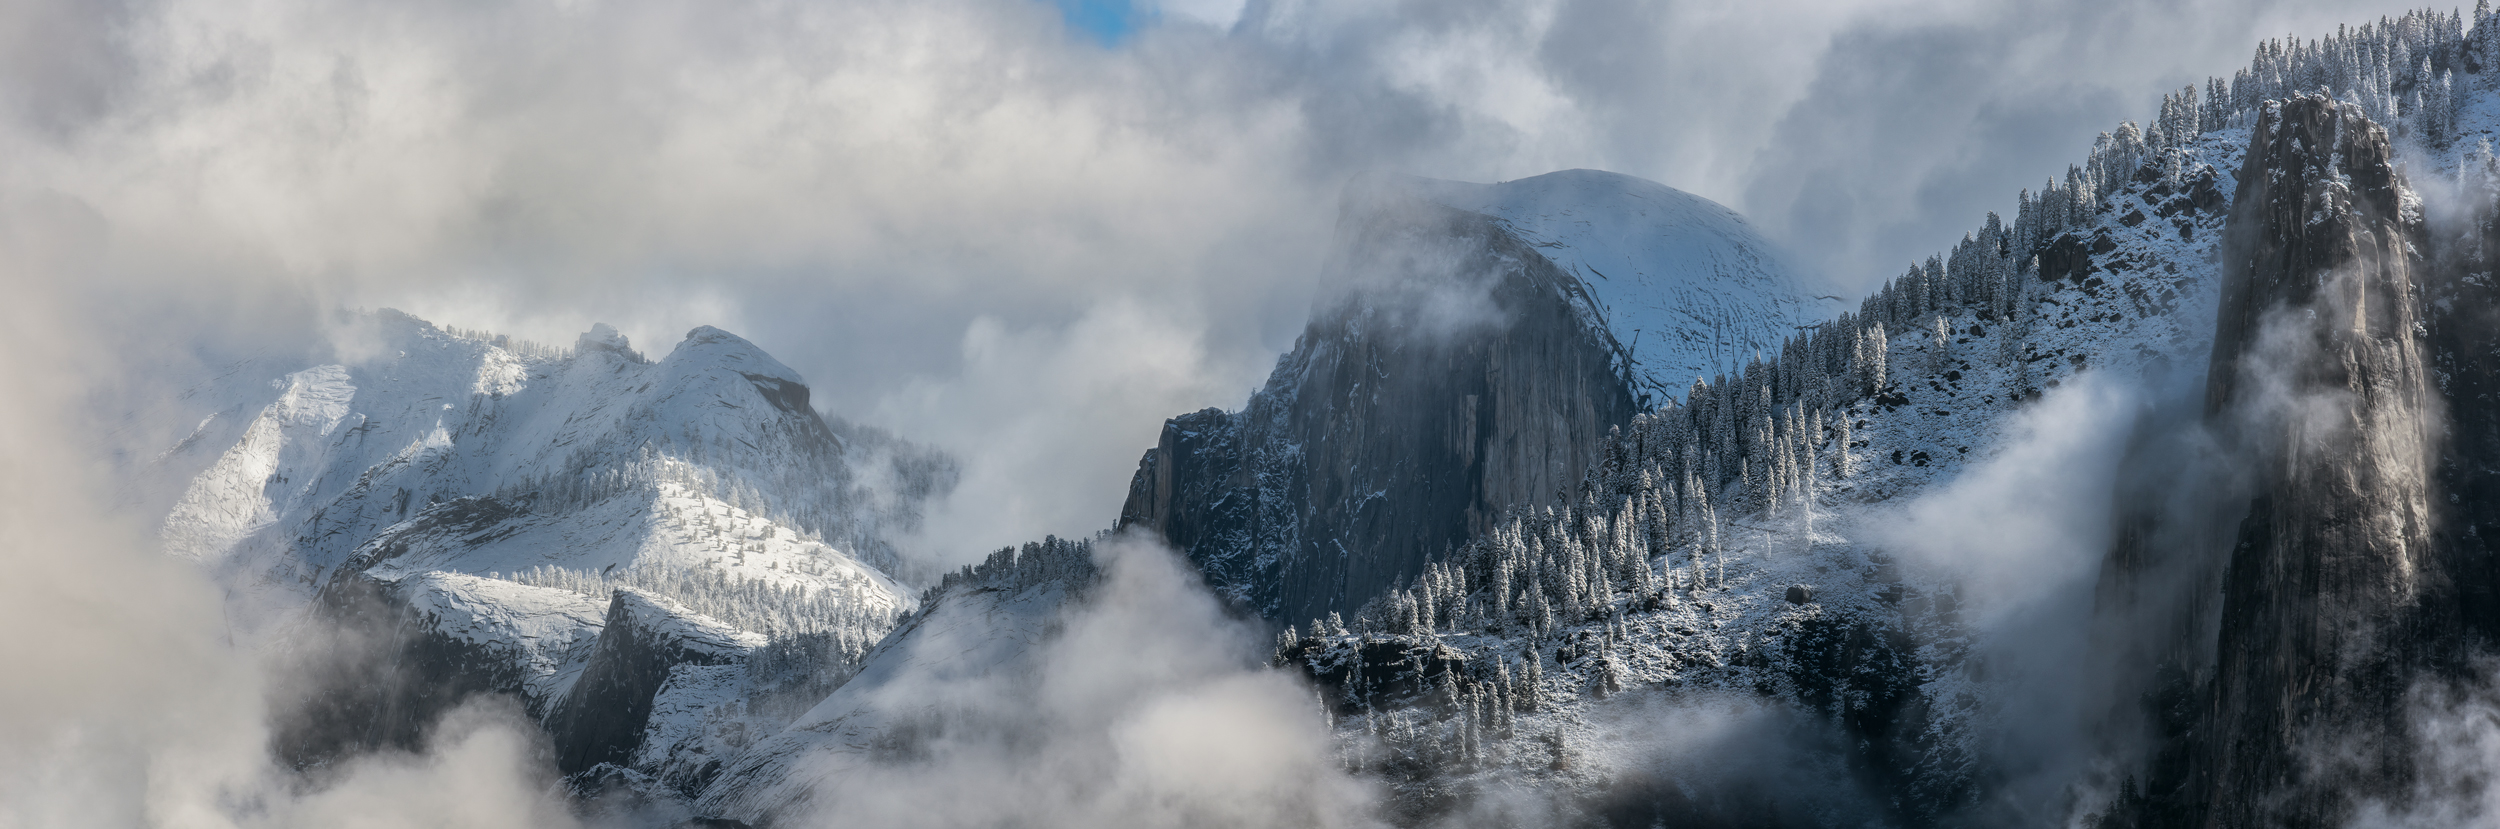 Yosemite National Park Half Dome Clouds Rest Winter Fog Panorama Fine Art Landscape Photography Mark Lilly